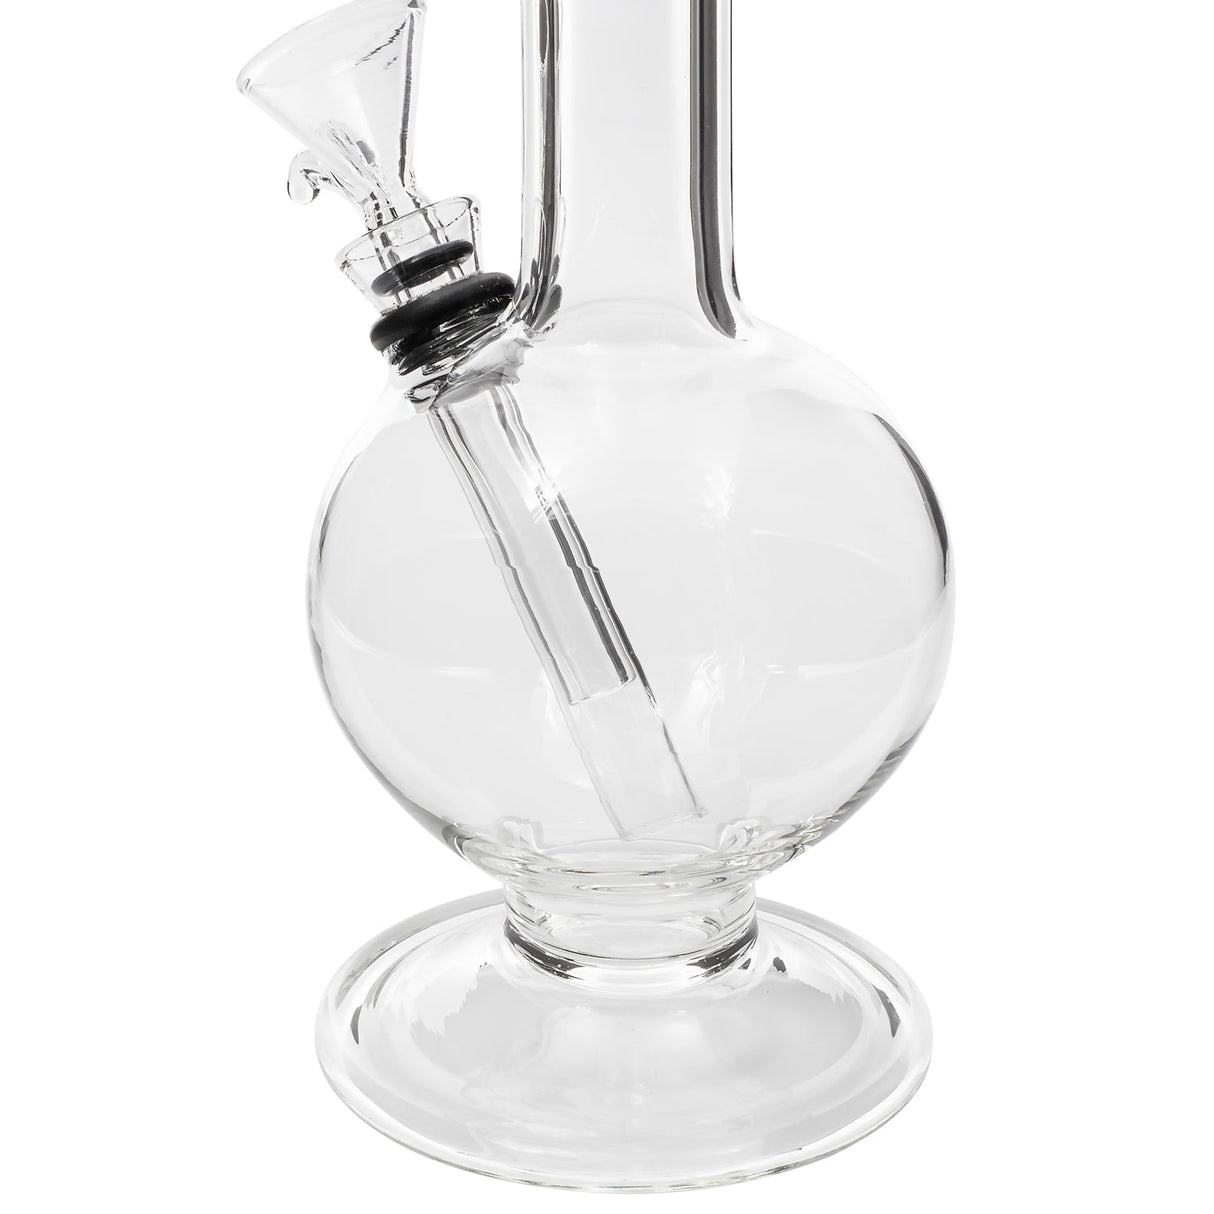 LA Pipes "The Icon" Glass Bubble Bong with Grommet Joint, 32mm Diameter, Side View